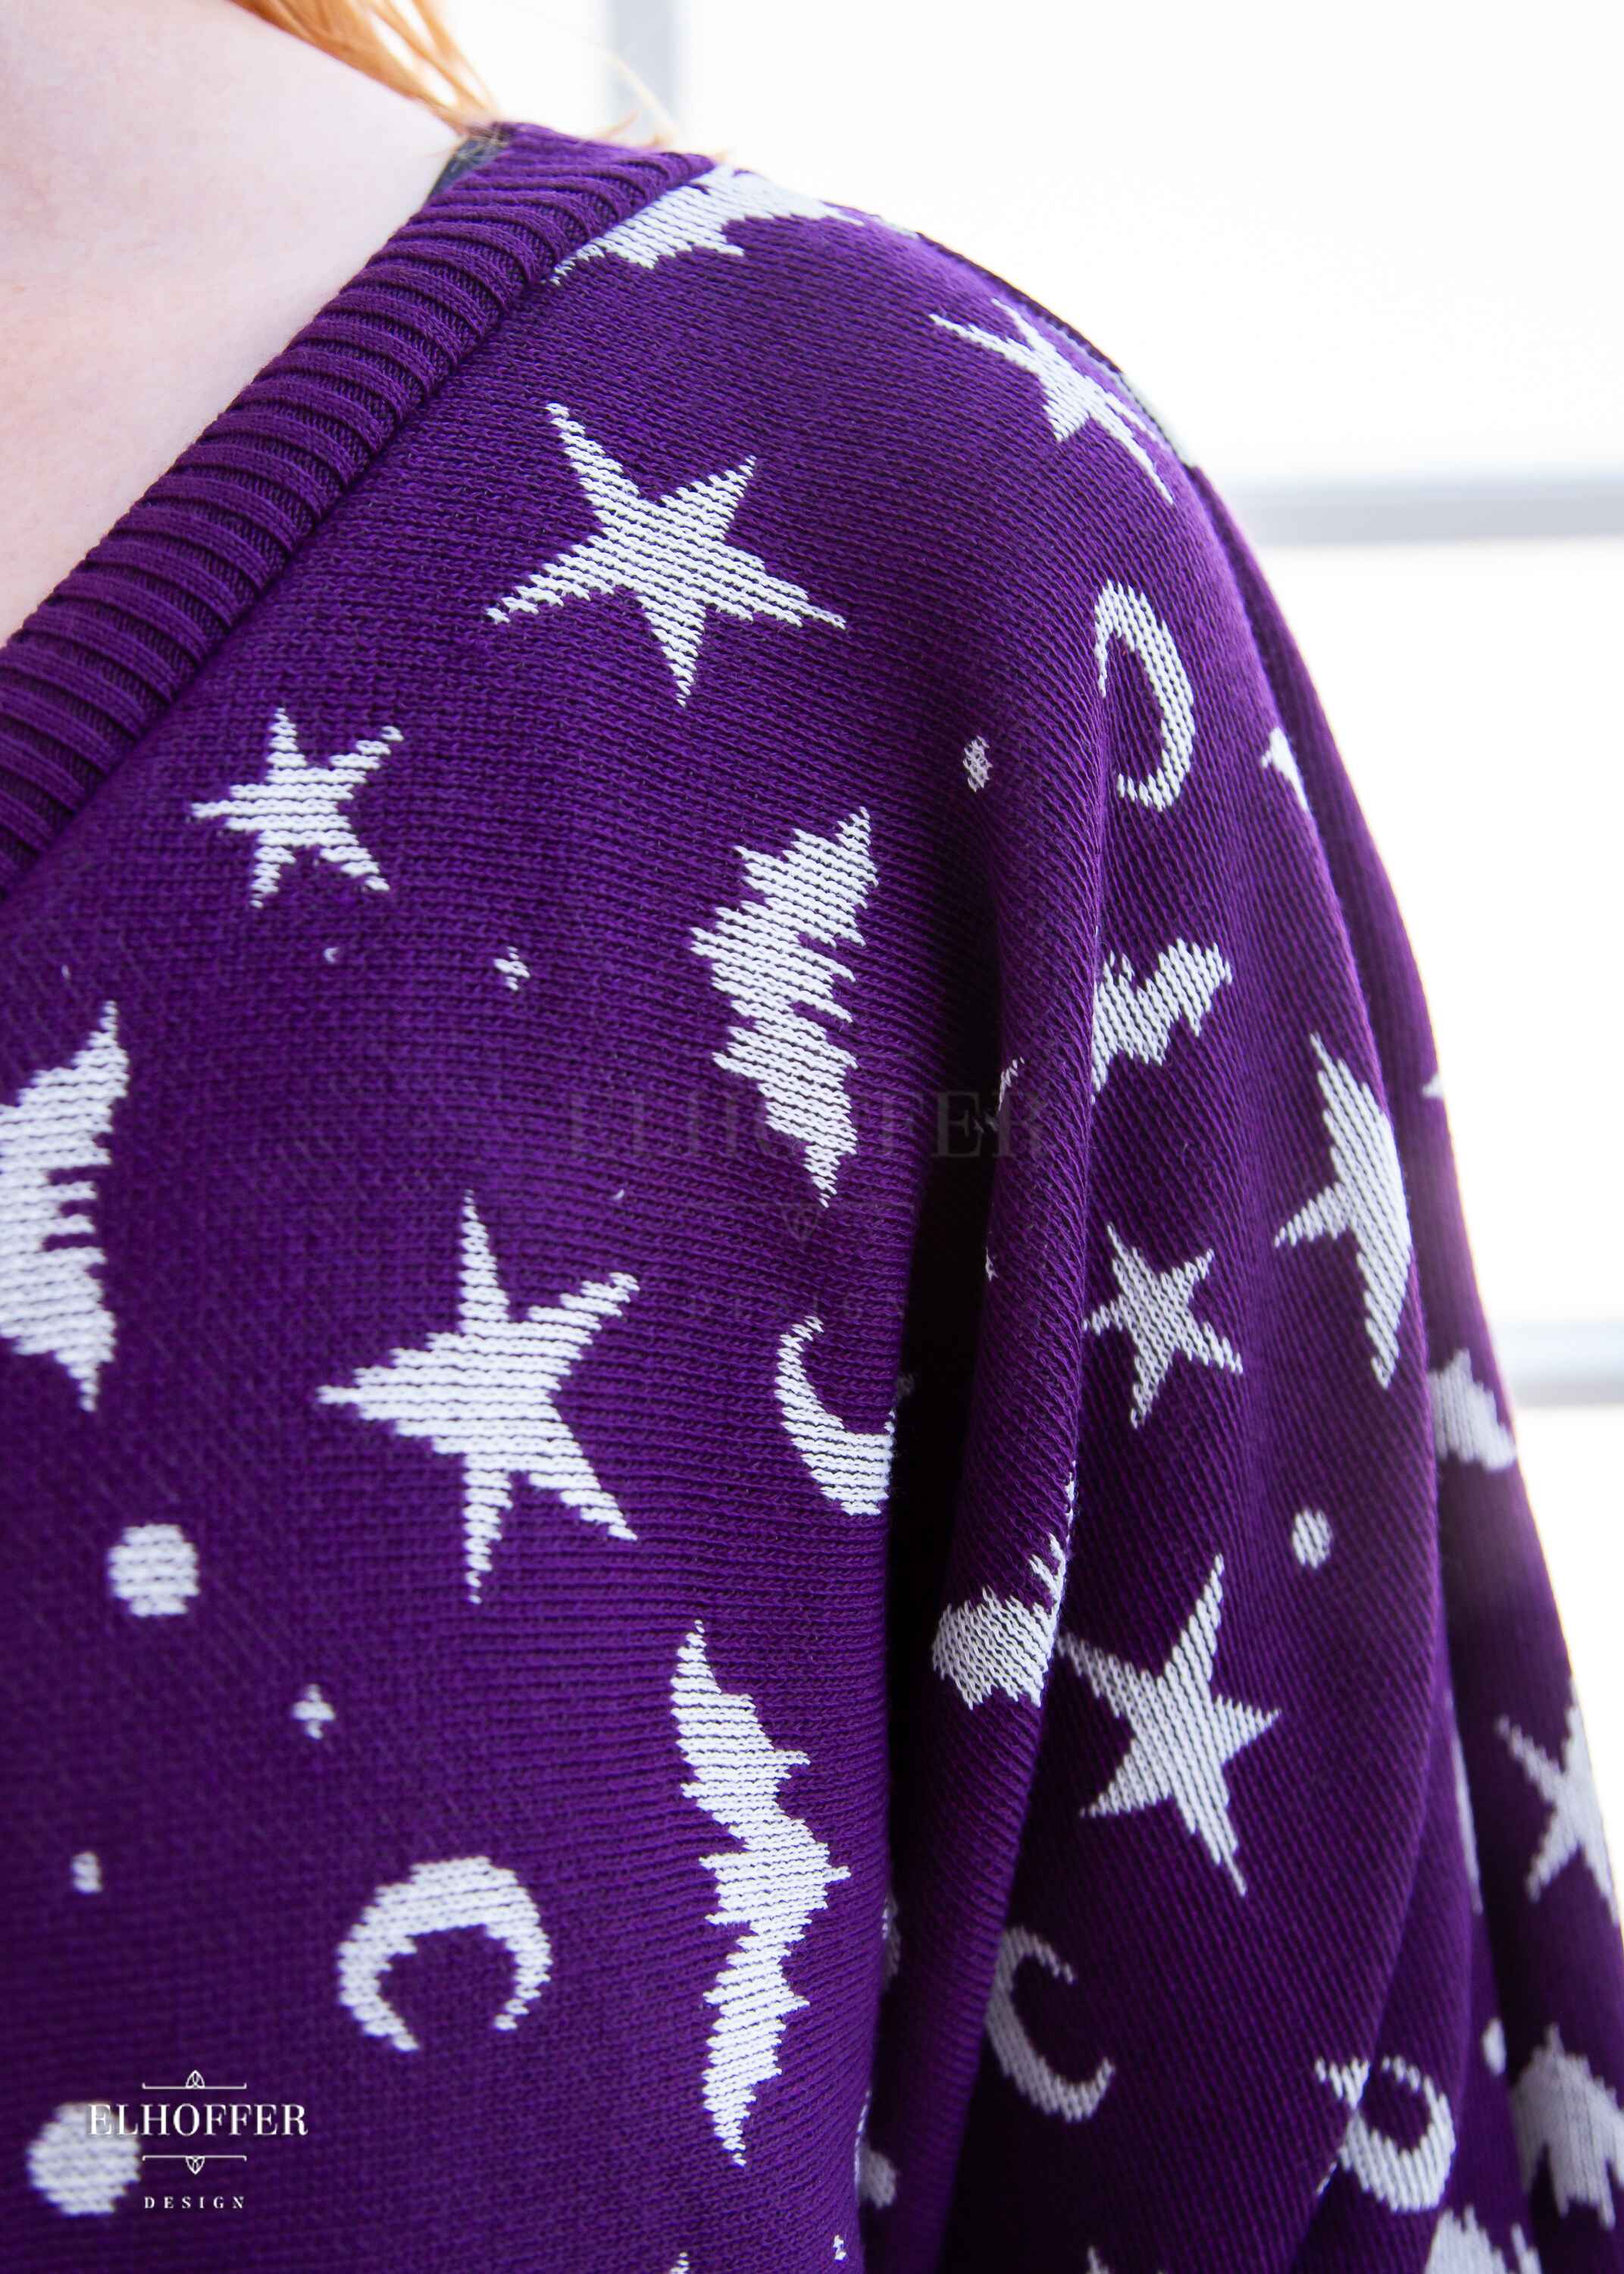 A closeup of the white bat and moon pattern in the purple knit sweater